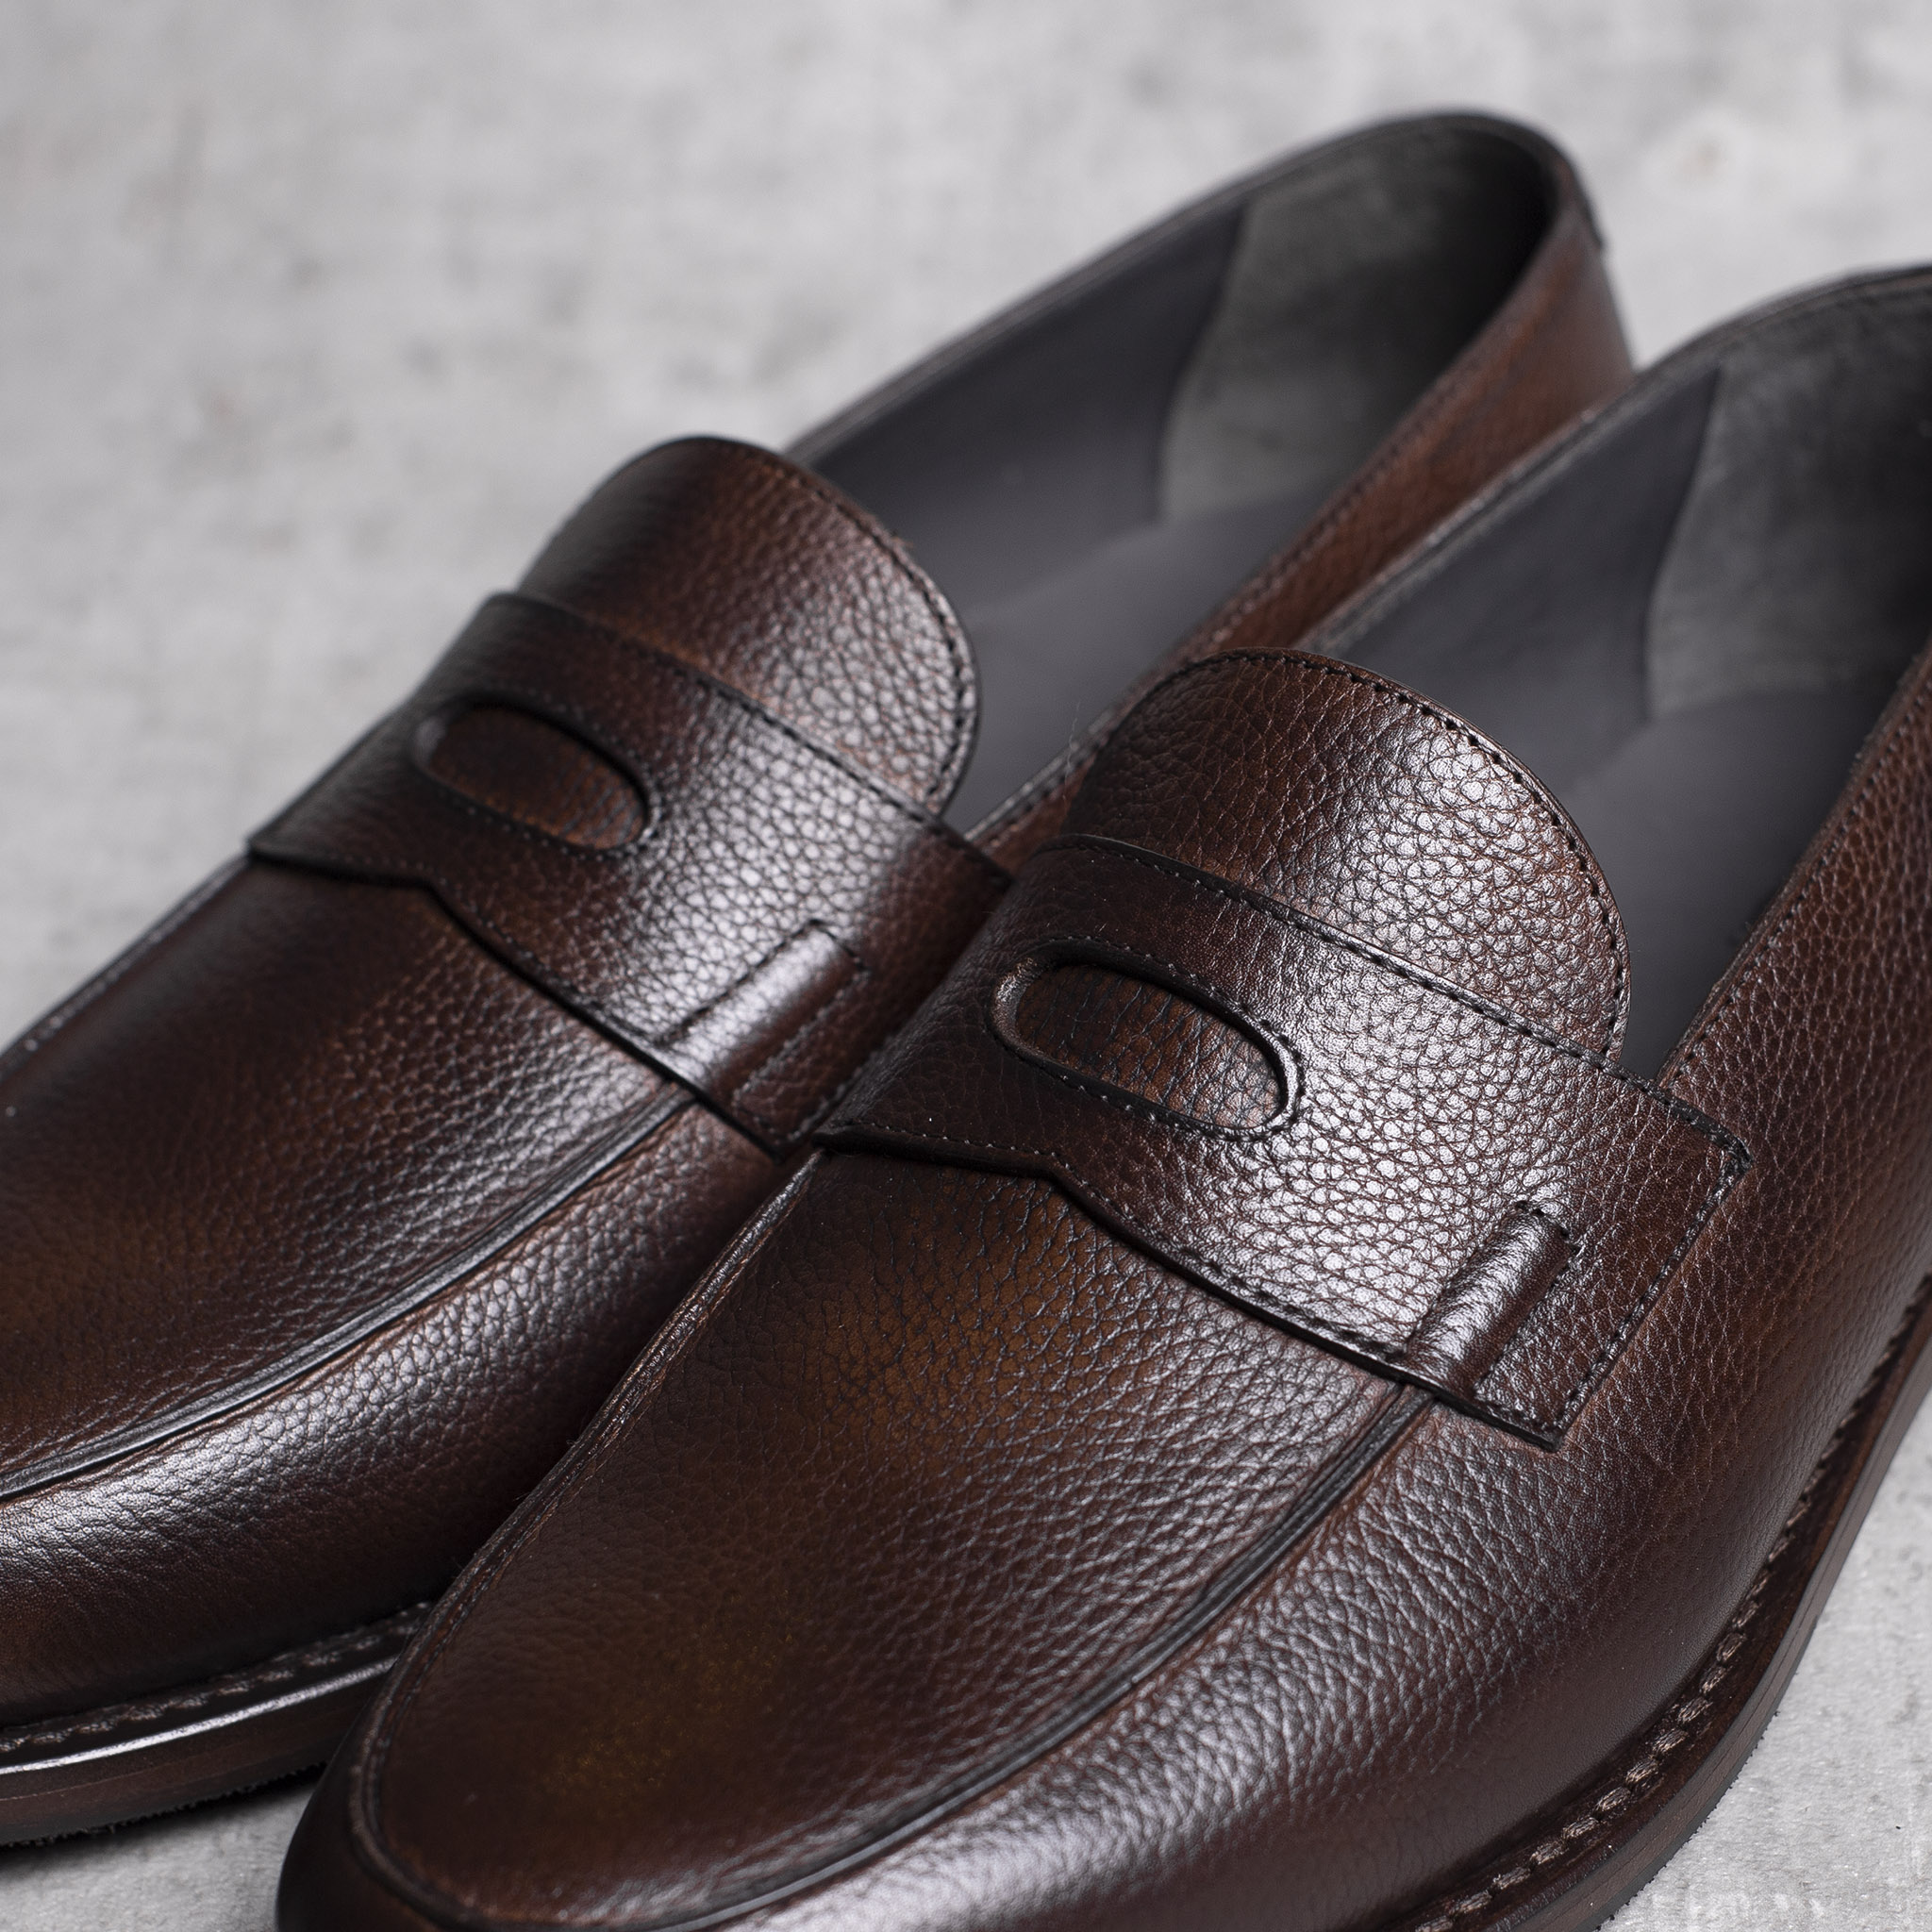 LOAFERS · 0647 Grain leather Toffee 6